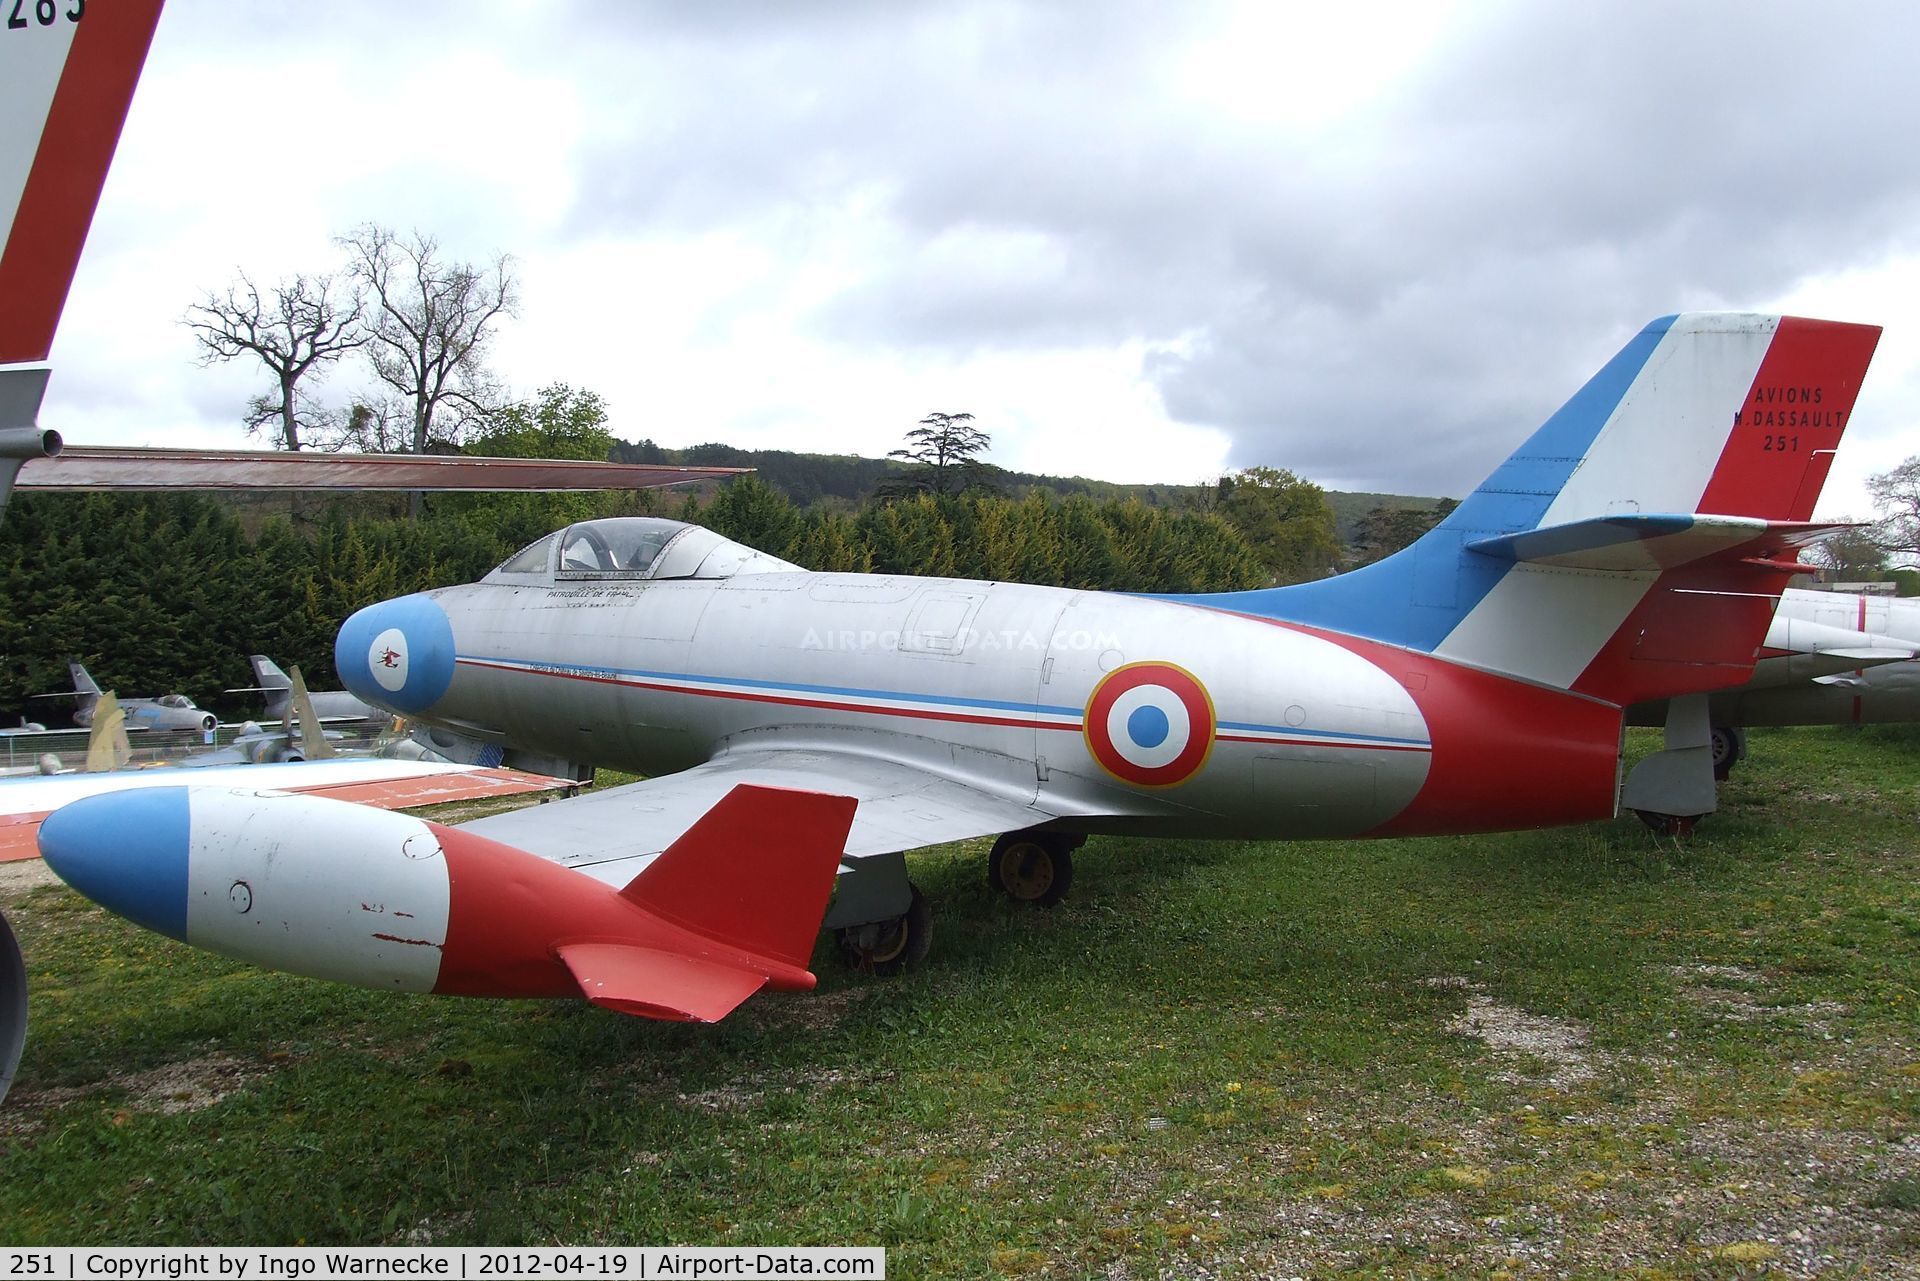 251, Dassault MD-450 Ouragan C/N 215, Dassault MD.450 Ouragan at the Musee de l'Aviation du Chateau, Savigny-les-Beaune